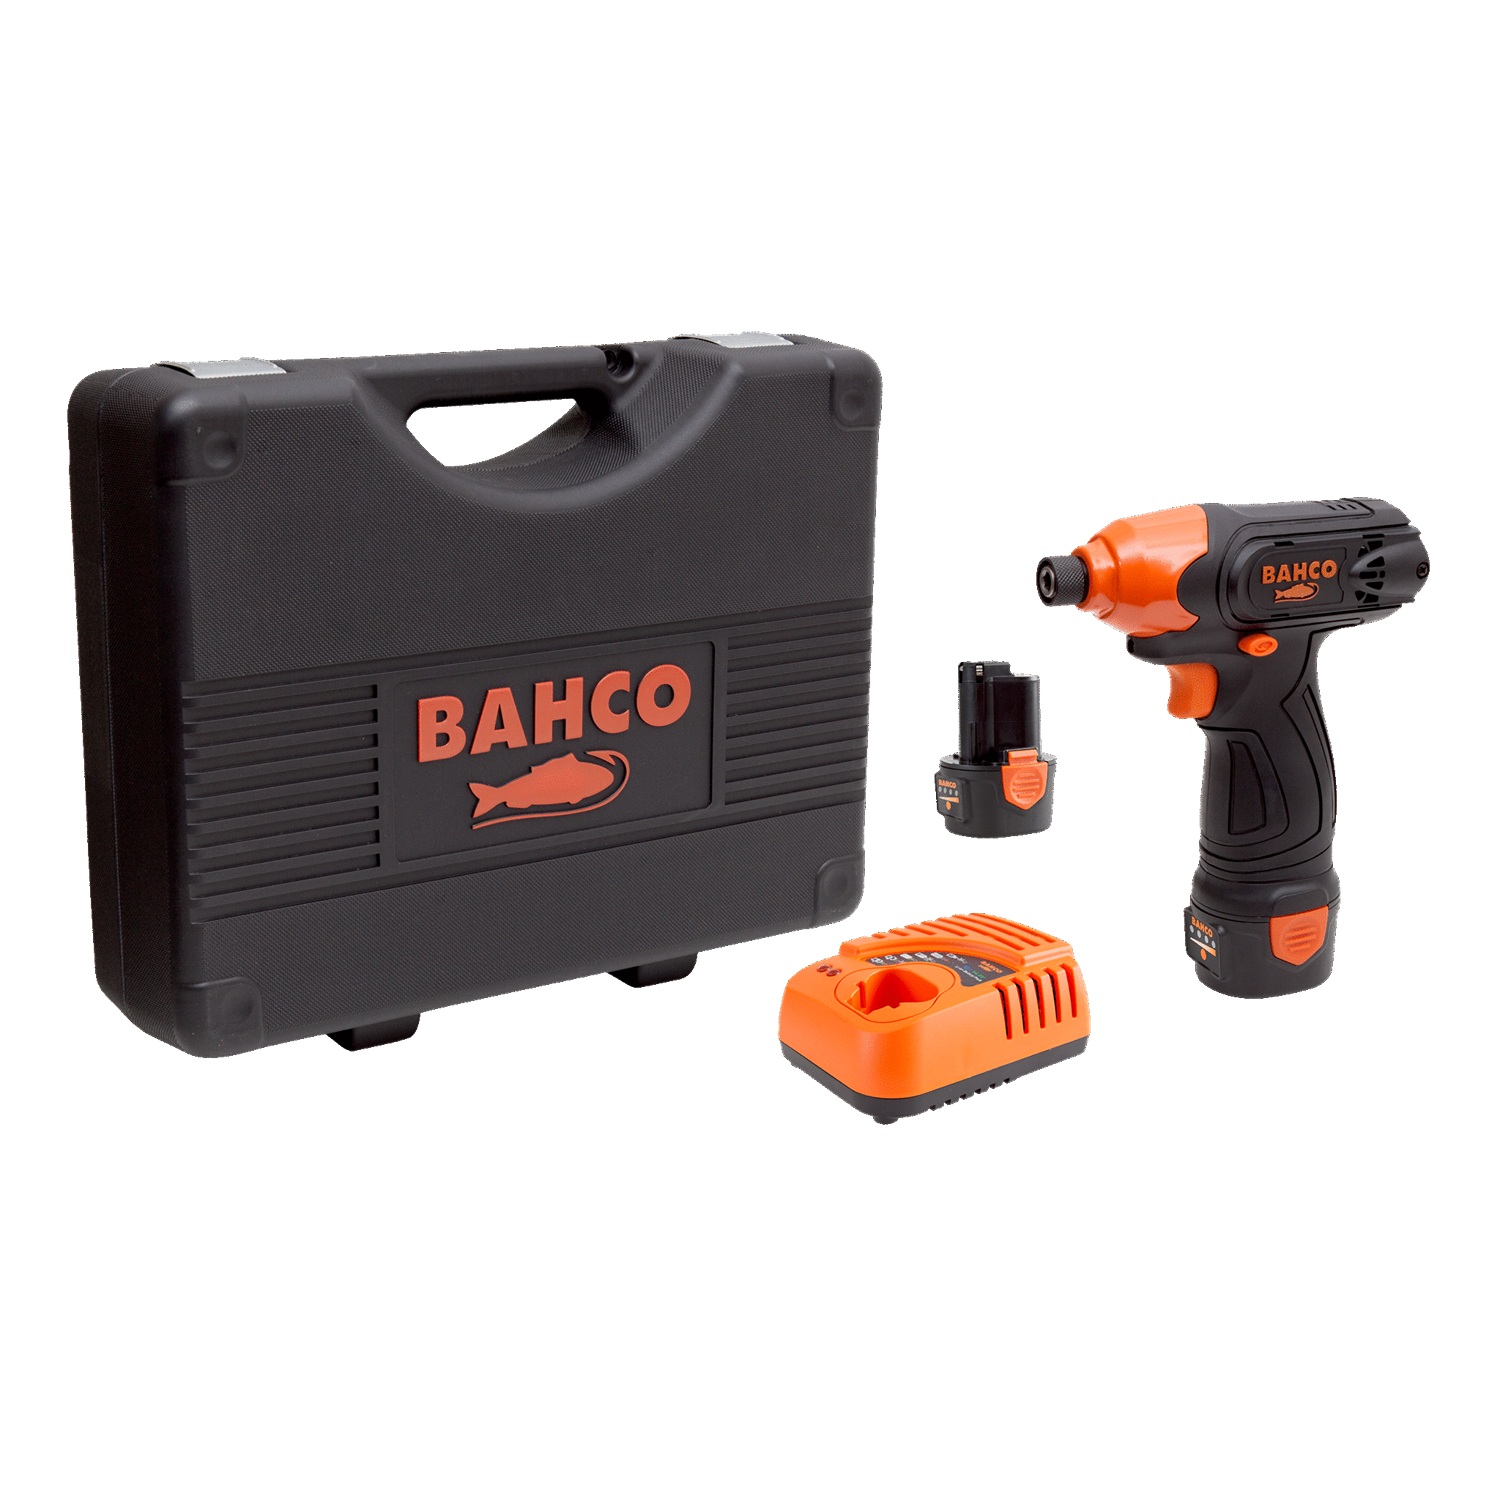 BAHCO BCL31IS1K1 12 V 1/4” Cordless Compact Impact Driver Kit - Premium Cordless Compact Impact Driver from BAHCO - Shop now at Yew Aik.